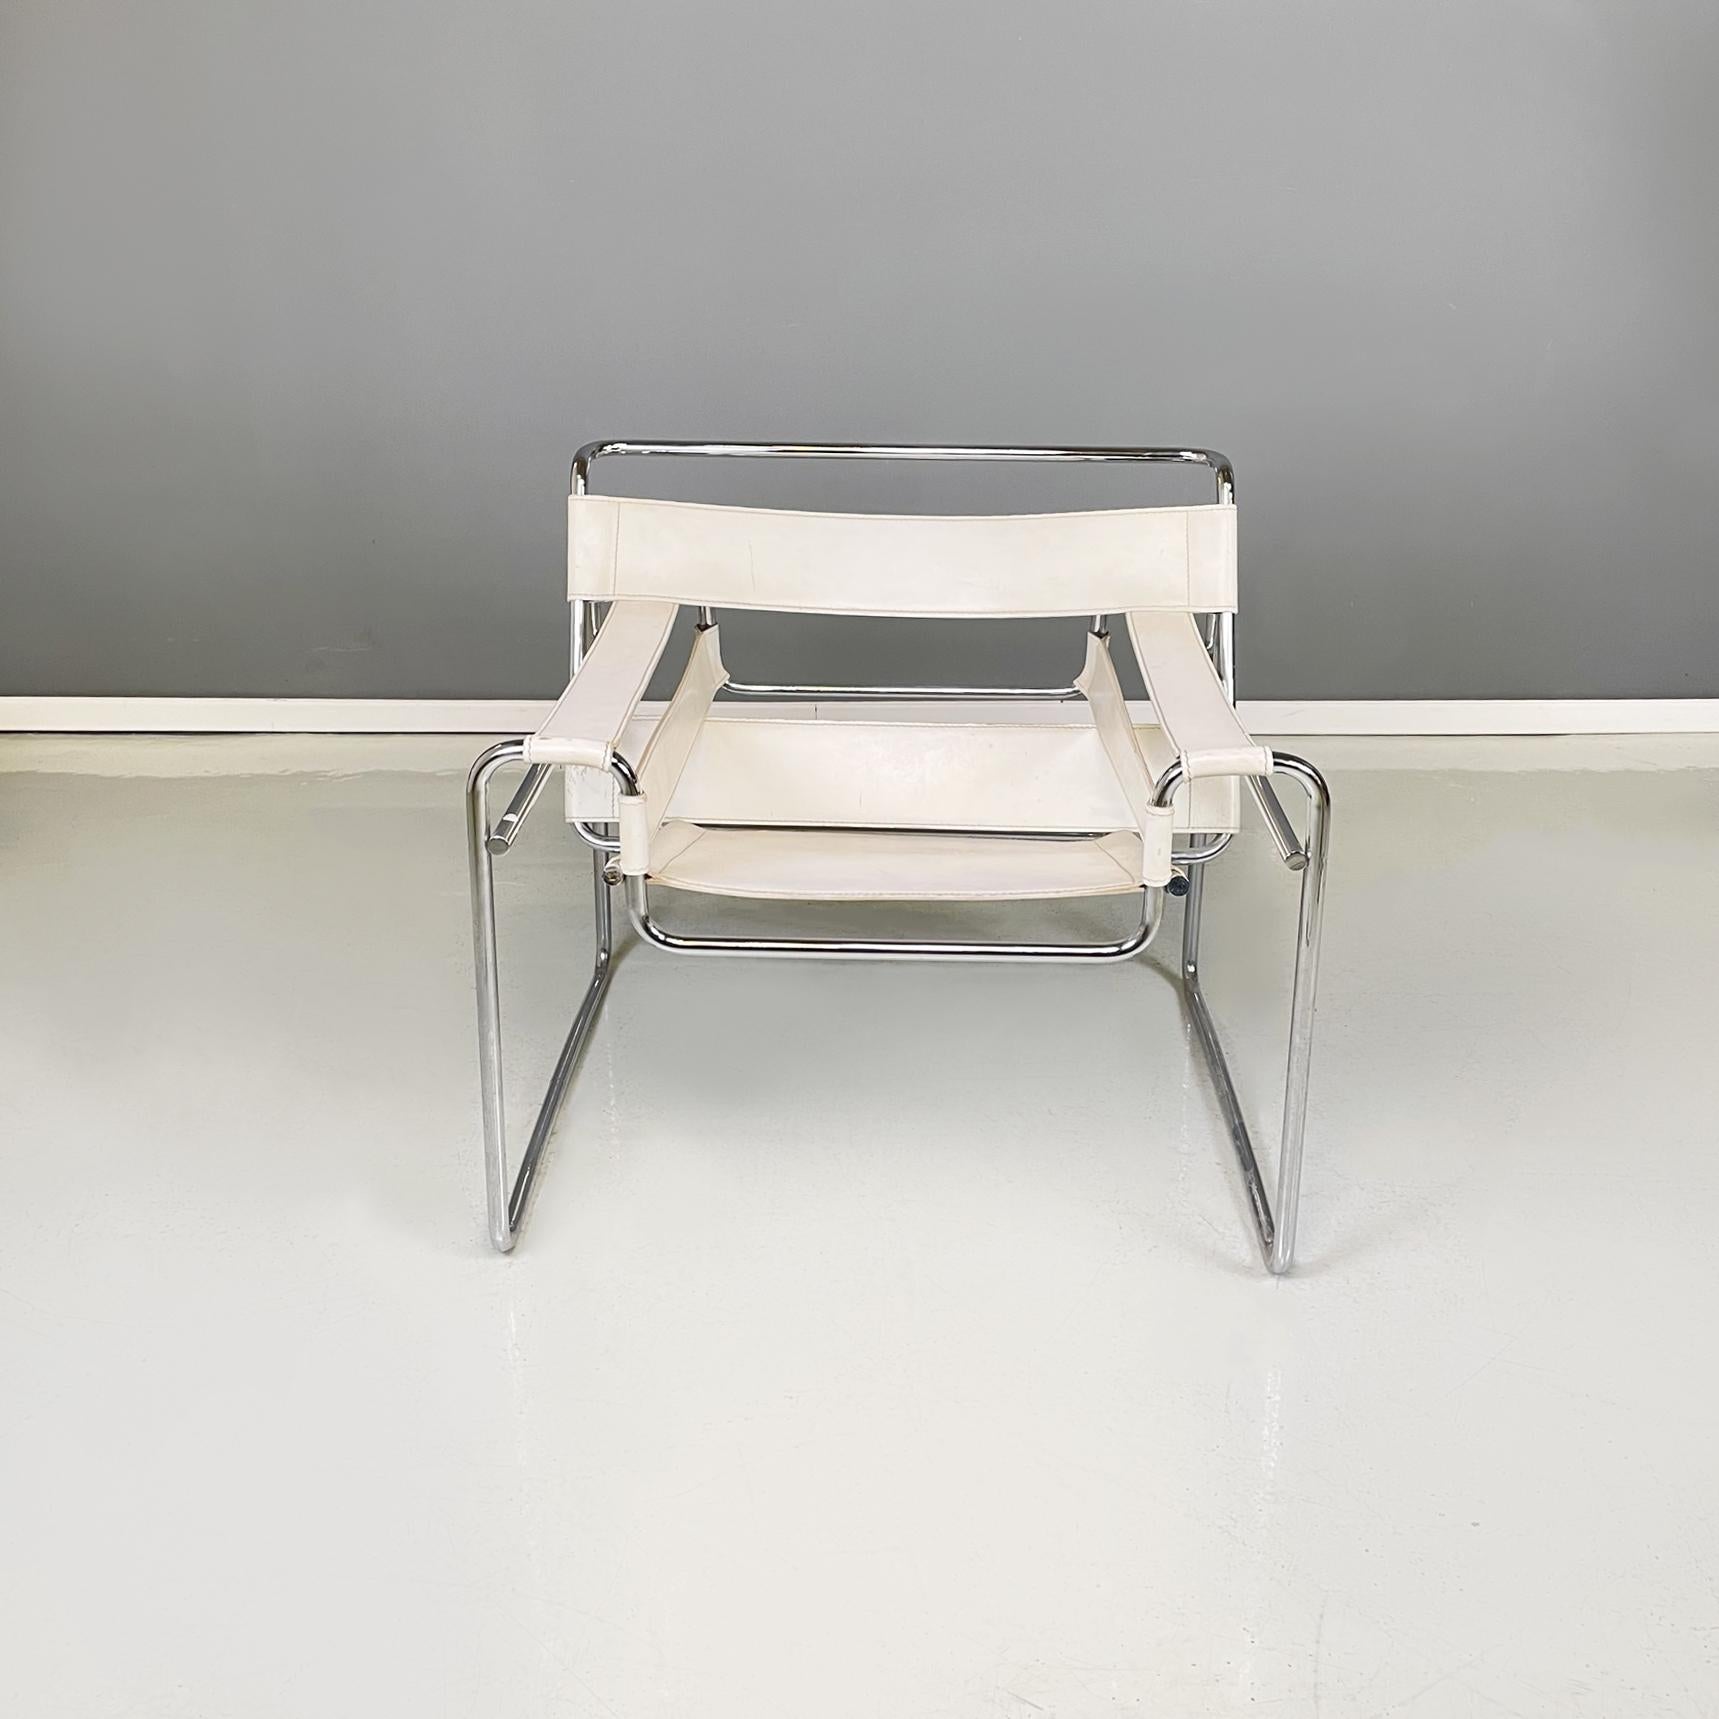 Italian modern White Armchair Wassily B3 by Marcel Breuer for Gavina, 1960s
Iconic Armchair mod. Wassily, also known as the mod. B3, with a rectangular seat in white leather. The structure, which holds the various leather parts, is in chromed